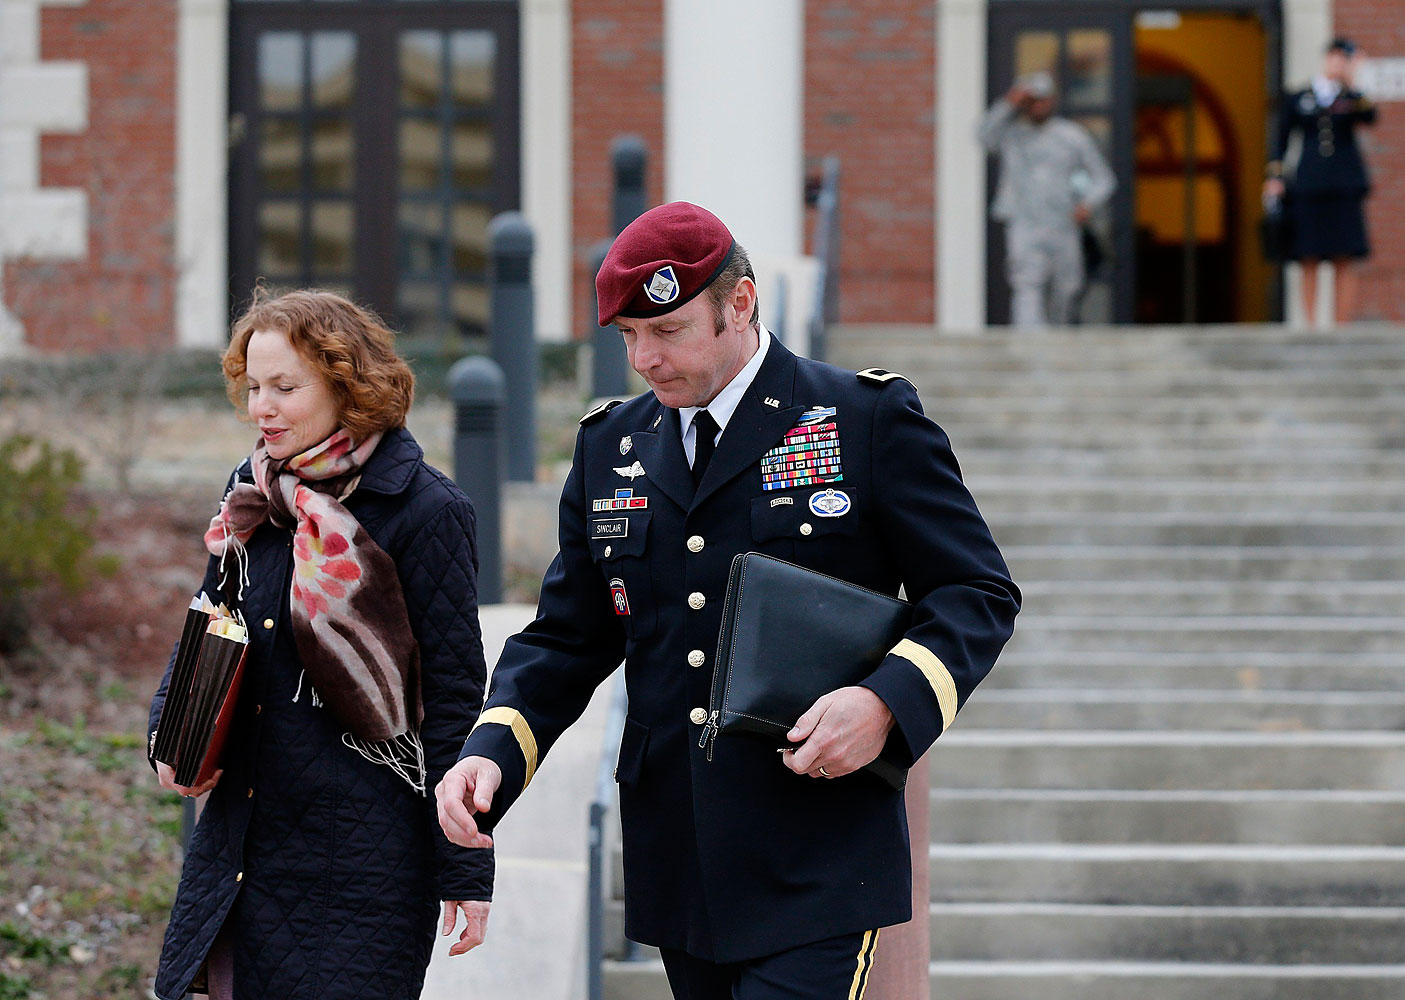 Army Brigadier General Jeffrey Sinclair leaves the courthouse with one of his attorneys at Fort Bragg in Fayetteville, N.C., on March 4, 2014. (Ellen Ozier—Reuters)